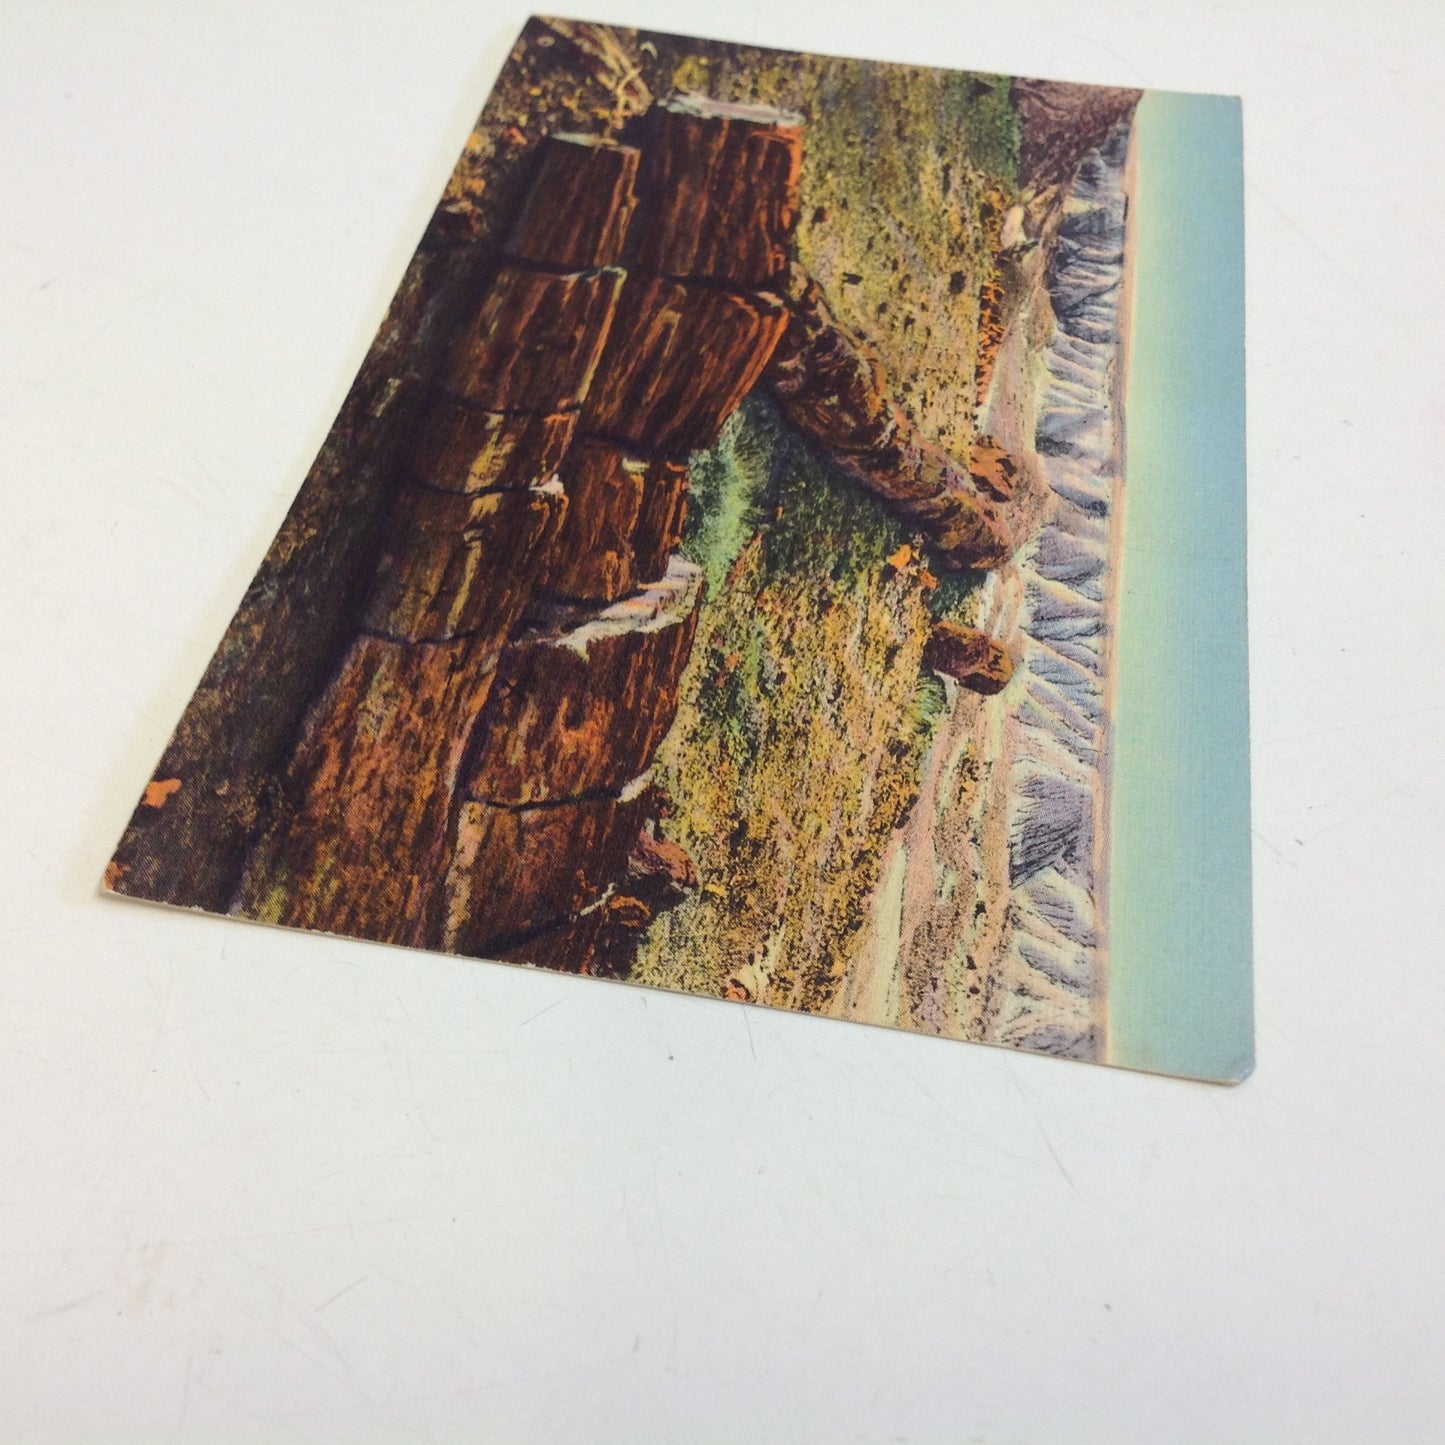 Vintage Curteich Color Postcard The Twin Sisters in Second Forest Petrified Forest Arizona